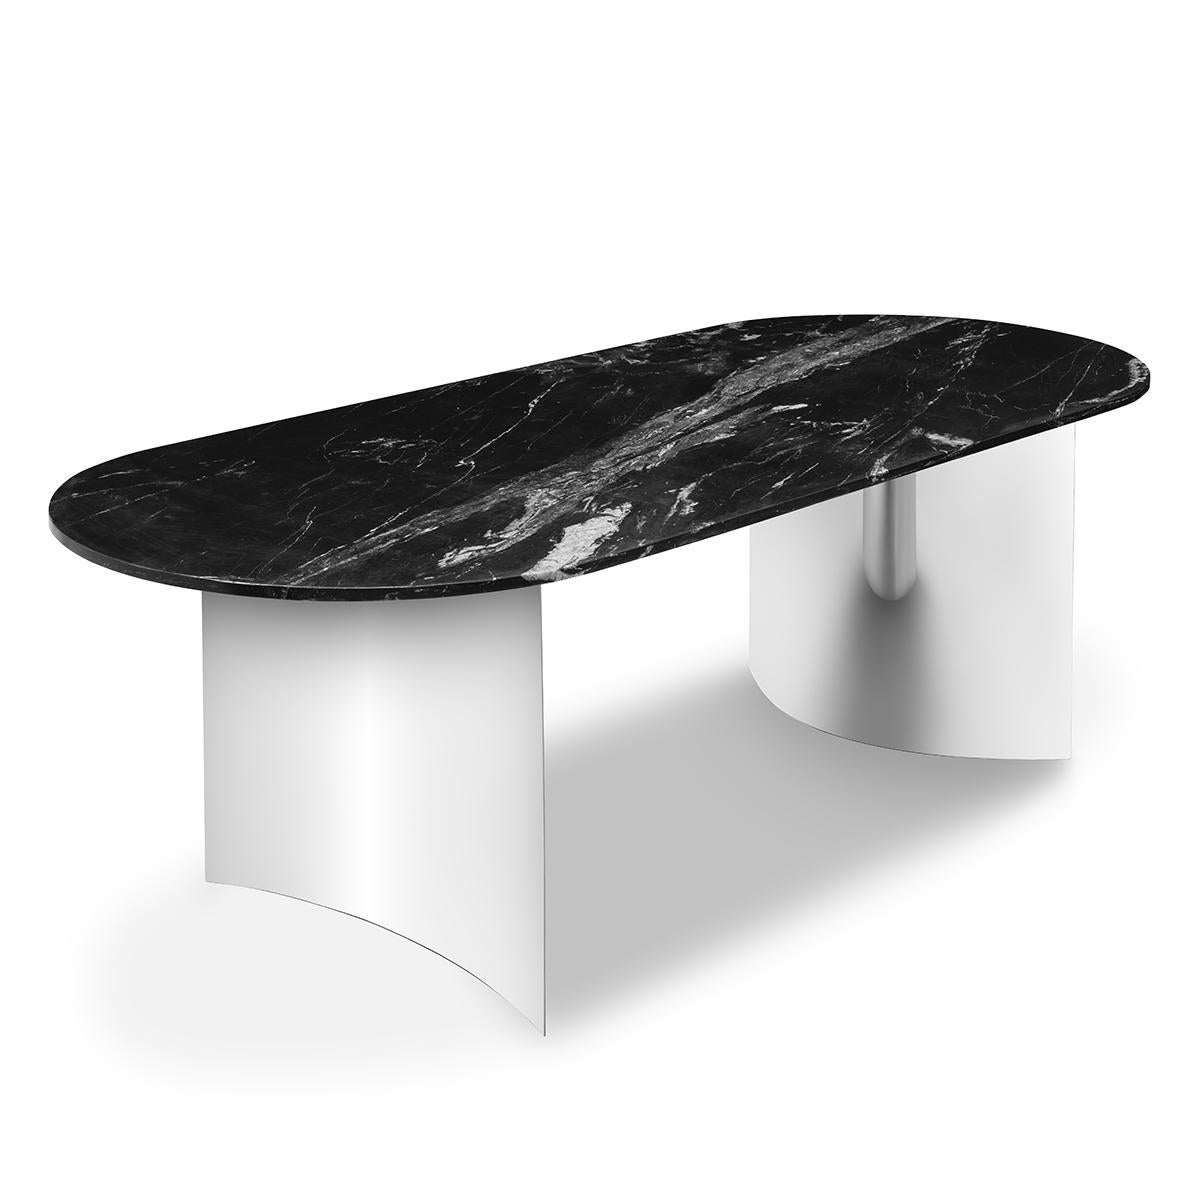 Table Orcante with chromed feet
and with black marble top.